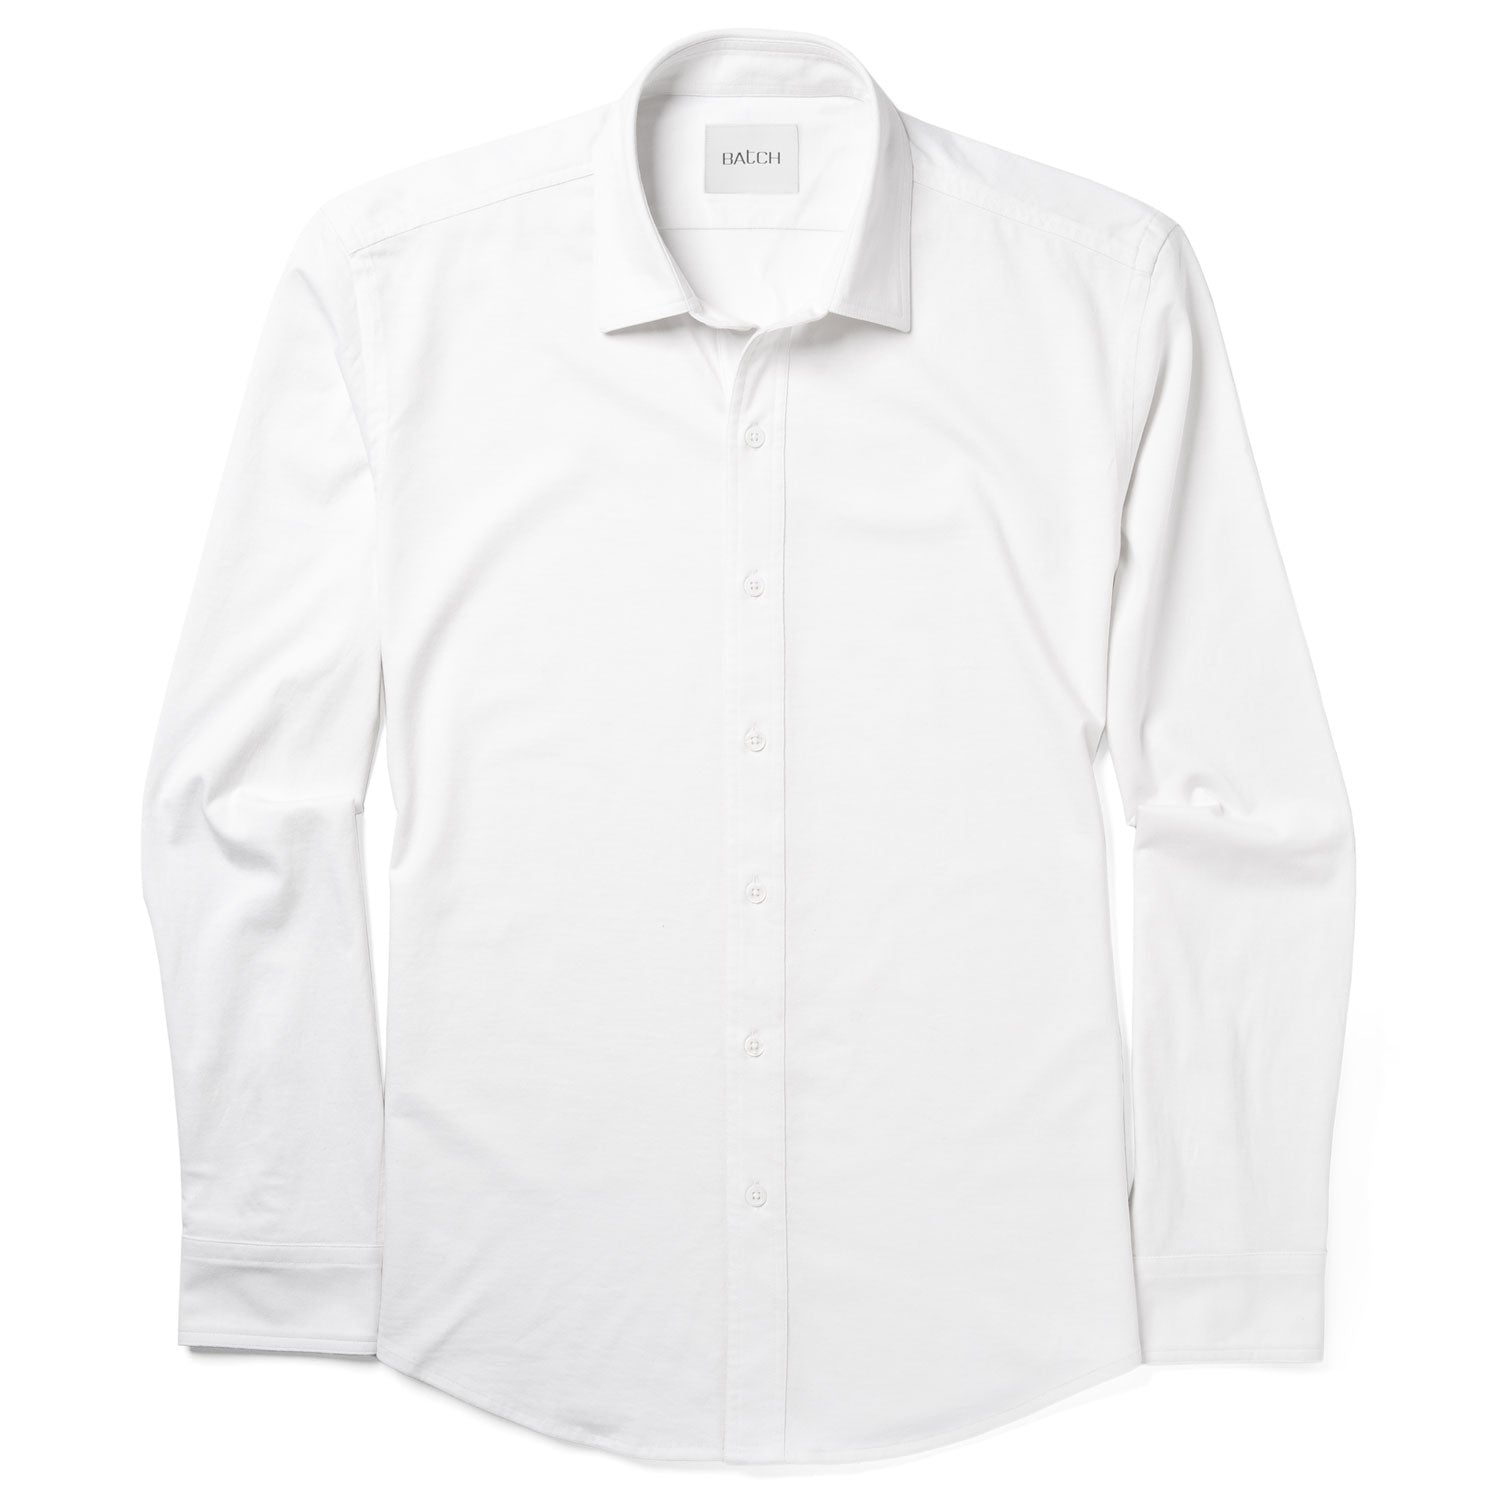 Essential T-Shirt Shirt - Pure White Cotton Jersey